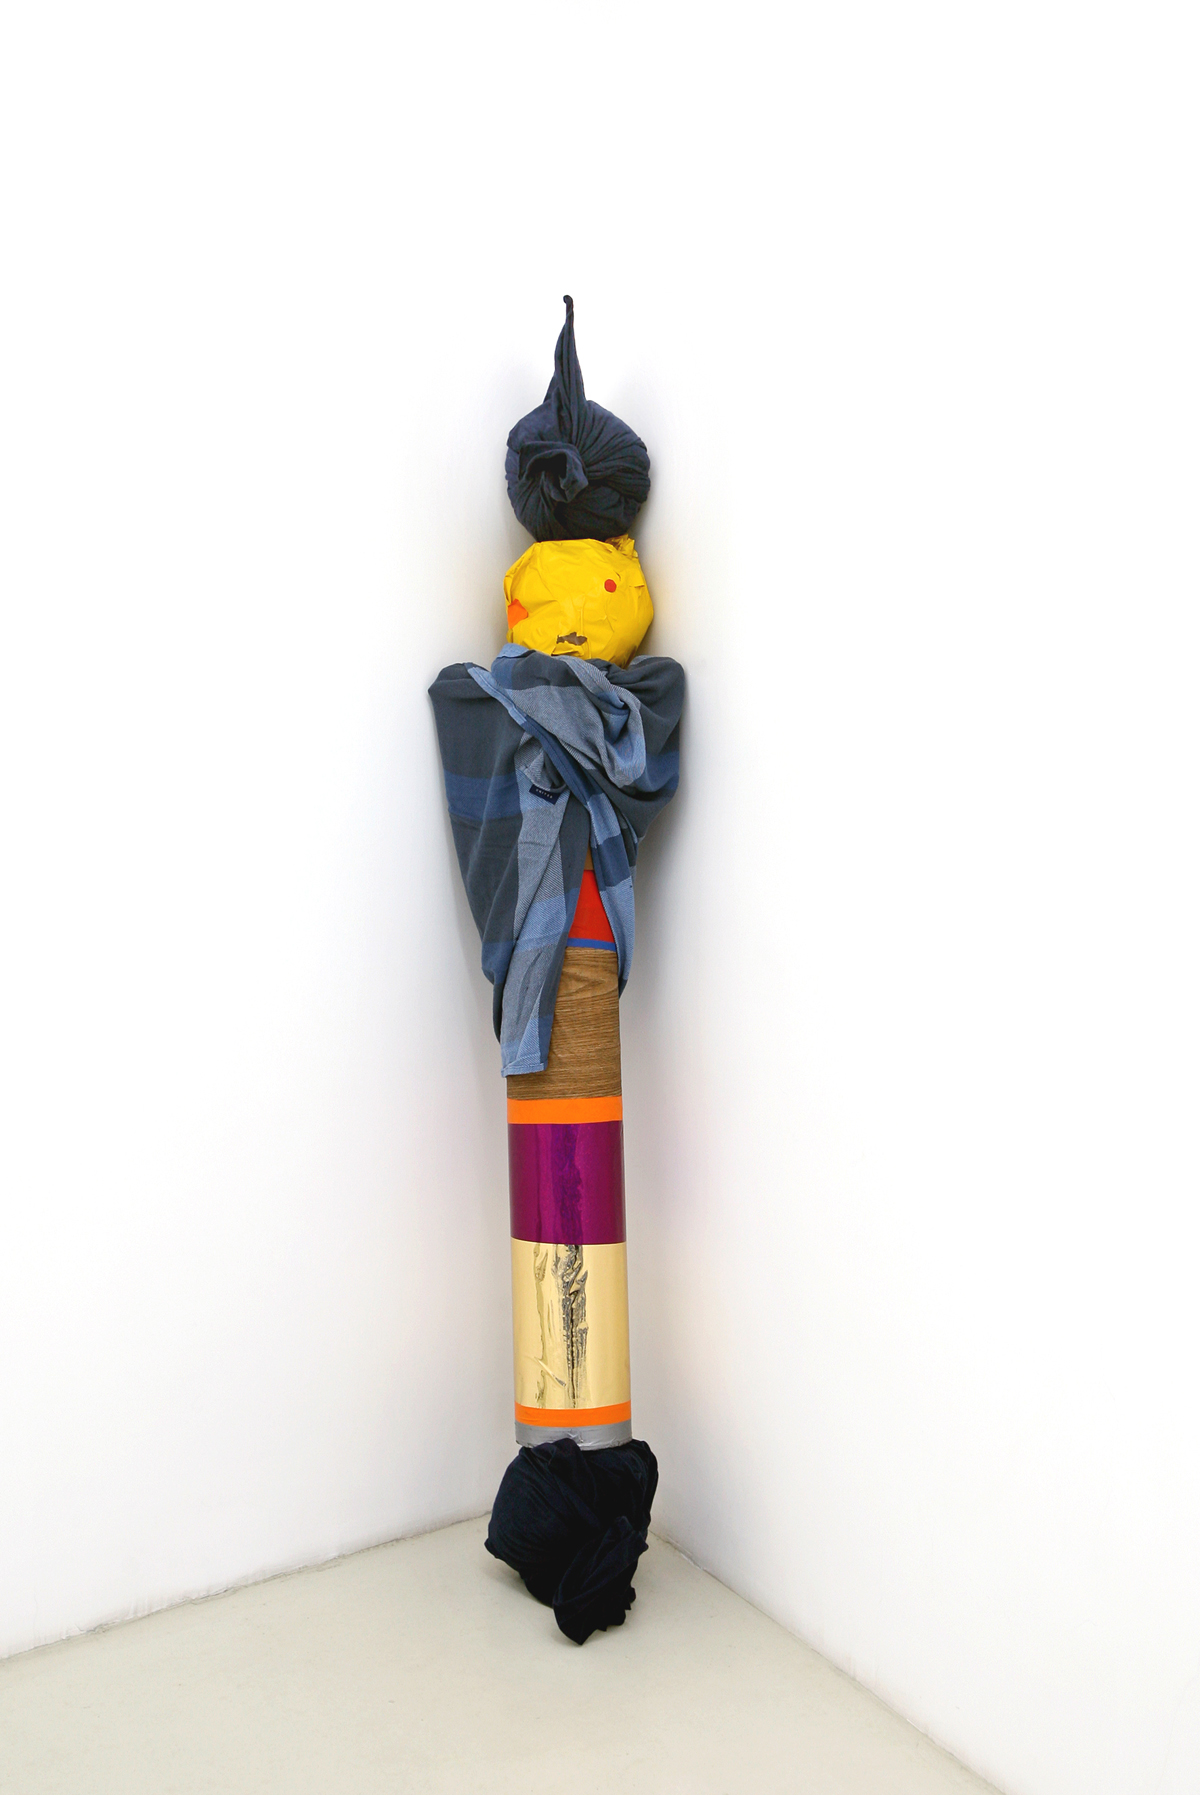 Kakashi or scarecrow stand-in, 2007, cloth, cardboard, adhesive vinyl, wood, cm 230 x 45